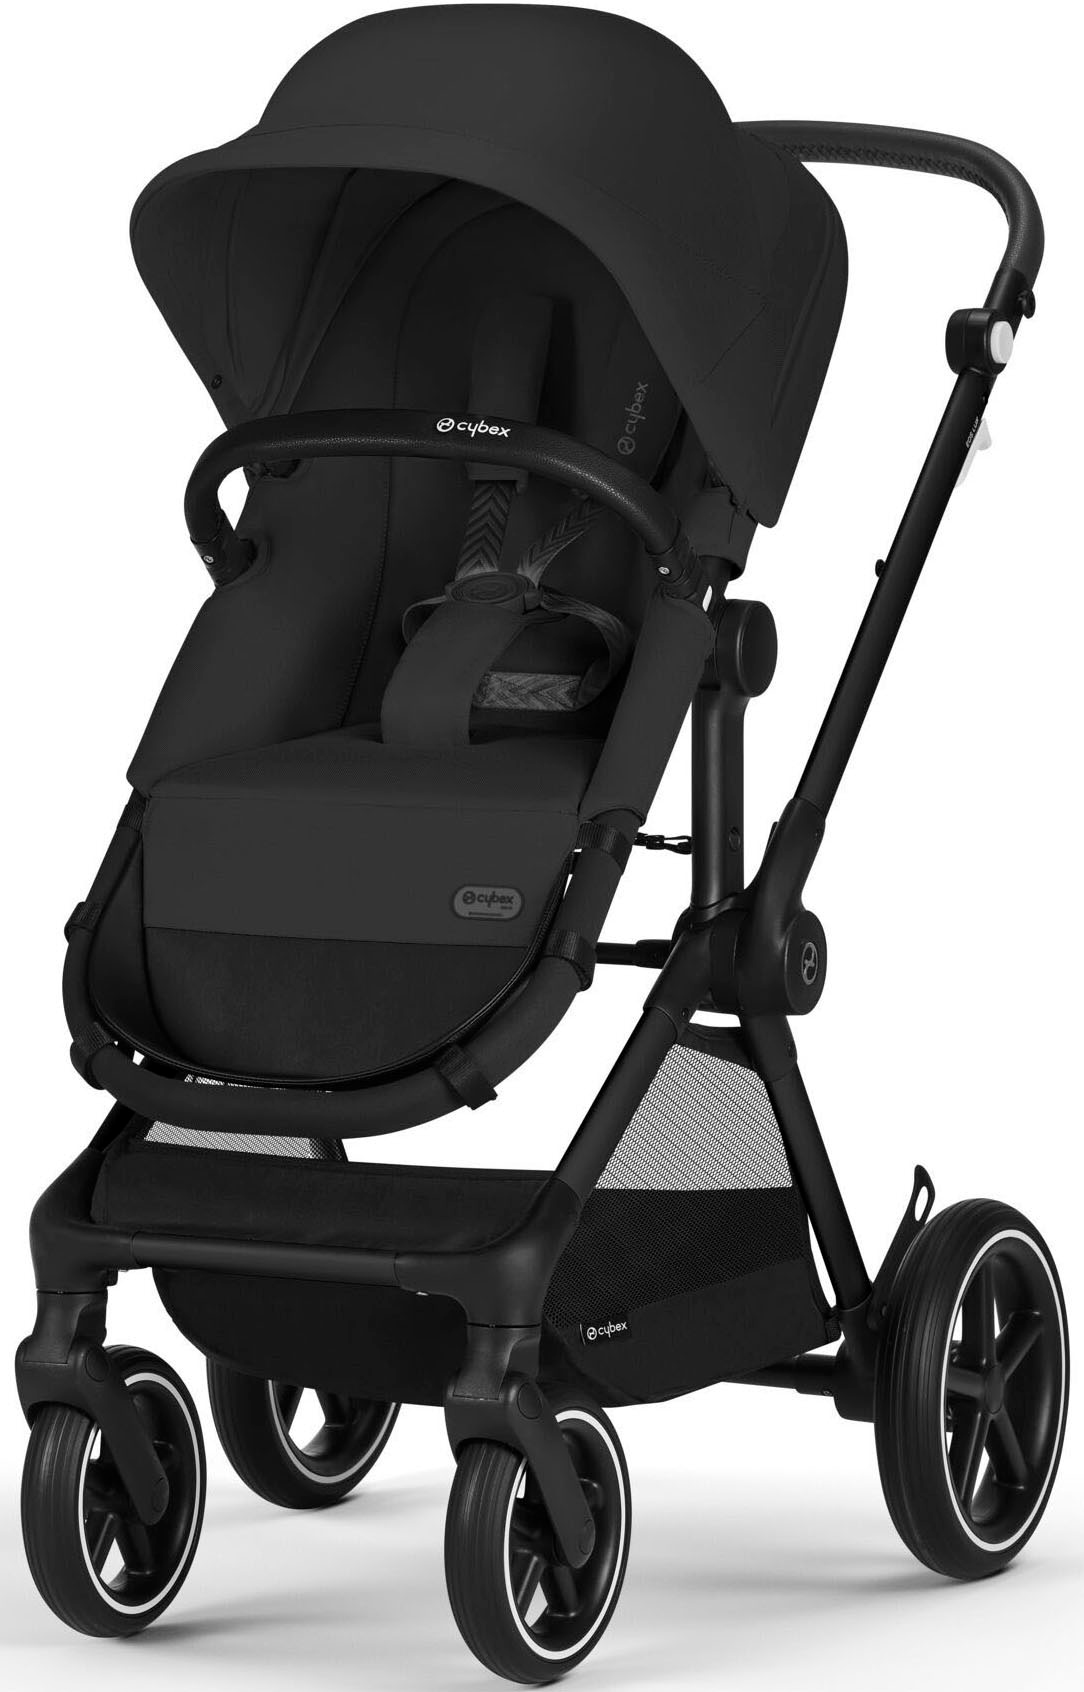 Kinder-Buggy »Cybex Gold, Eos Lux«, 22 kg